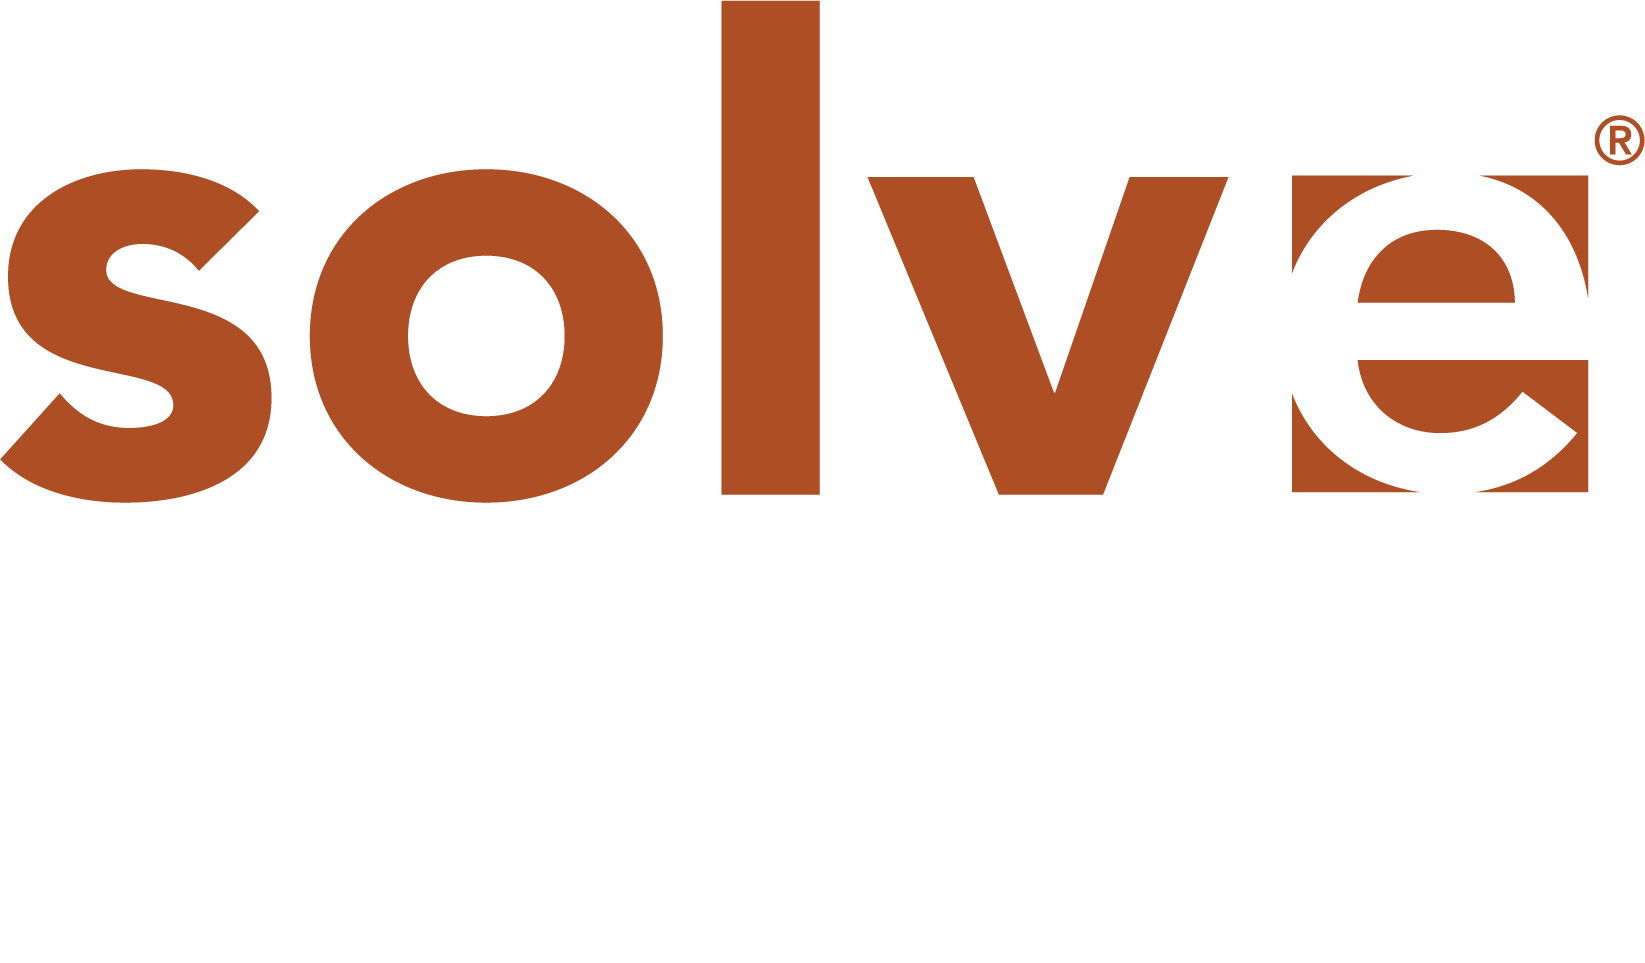 Solve - Elevated Development Solutions